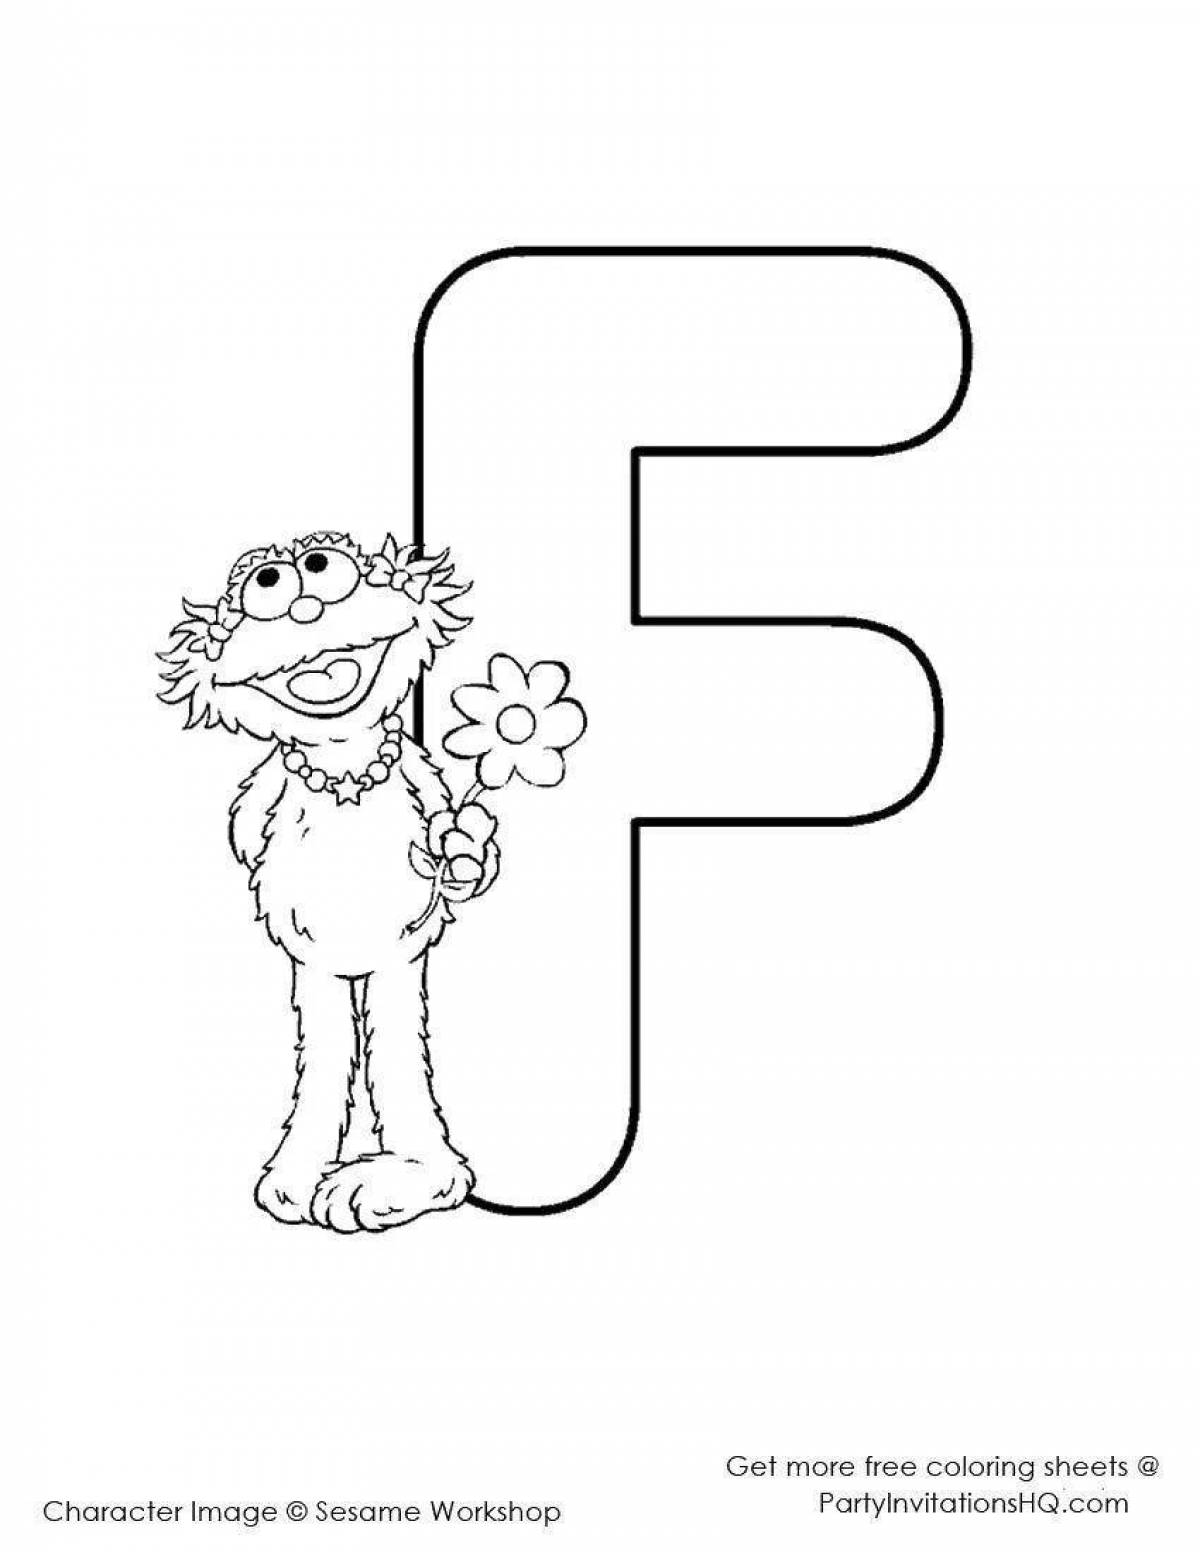 Charming letter f coloring book